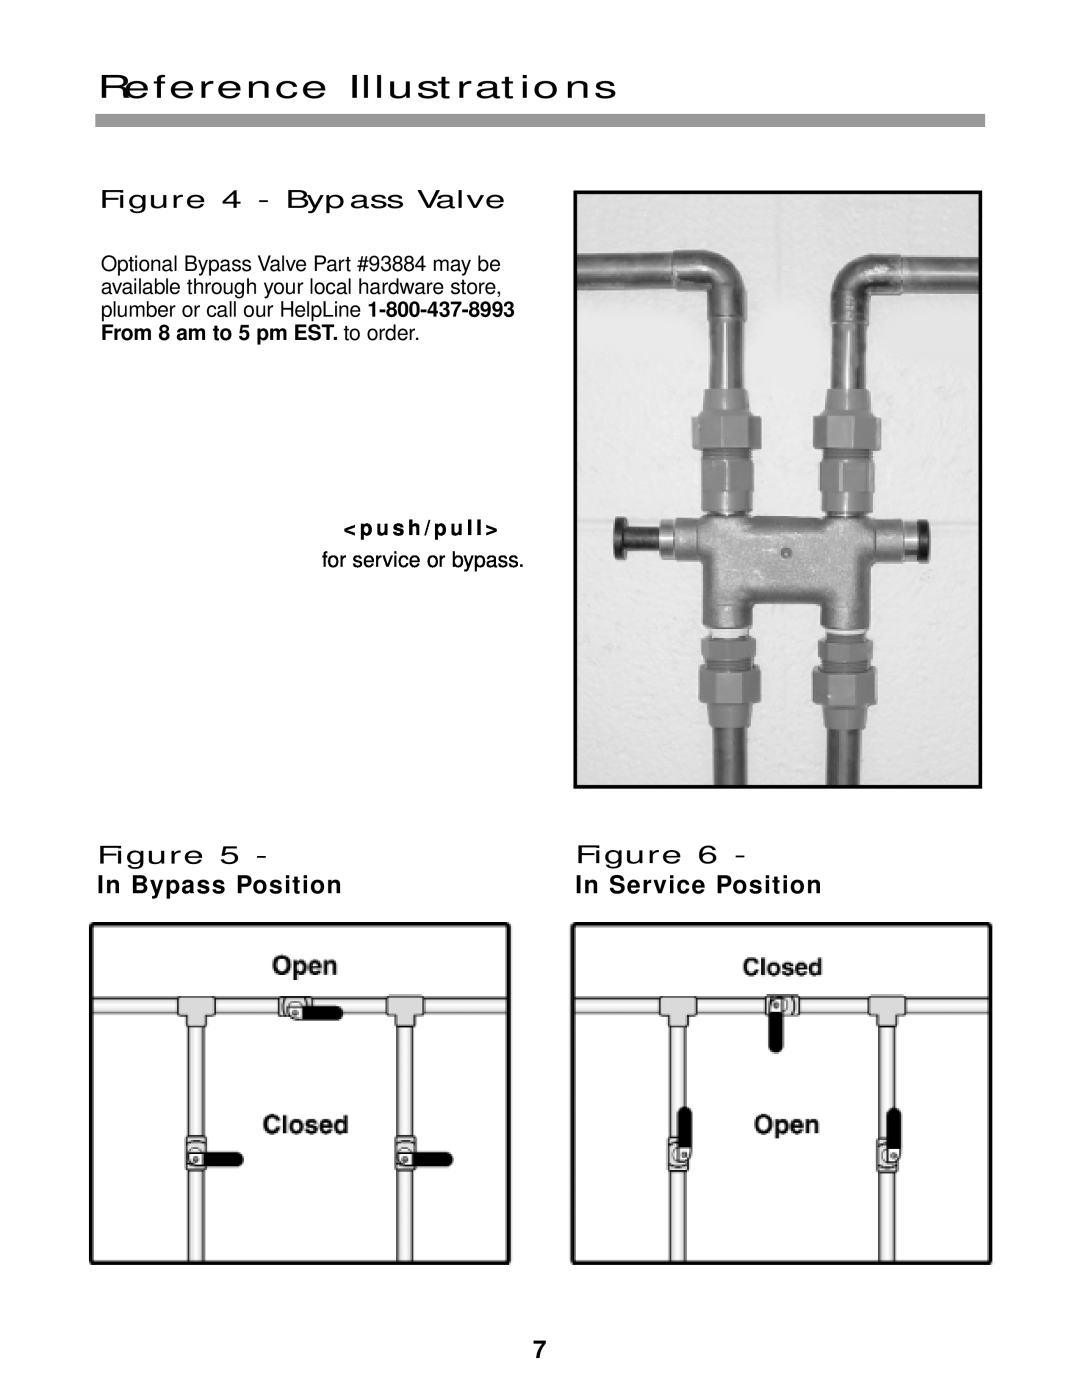 Water Boss 900, 550, 700 Bypass Valve, In Bypass Position, In Service Position, Reference Illustrations, Figure 